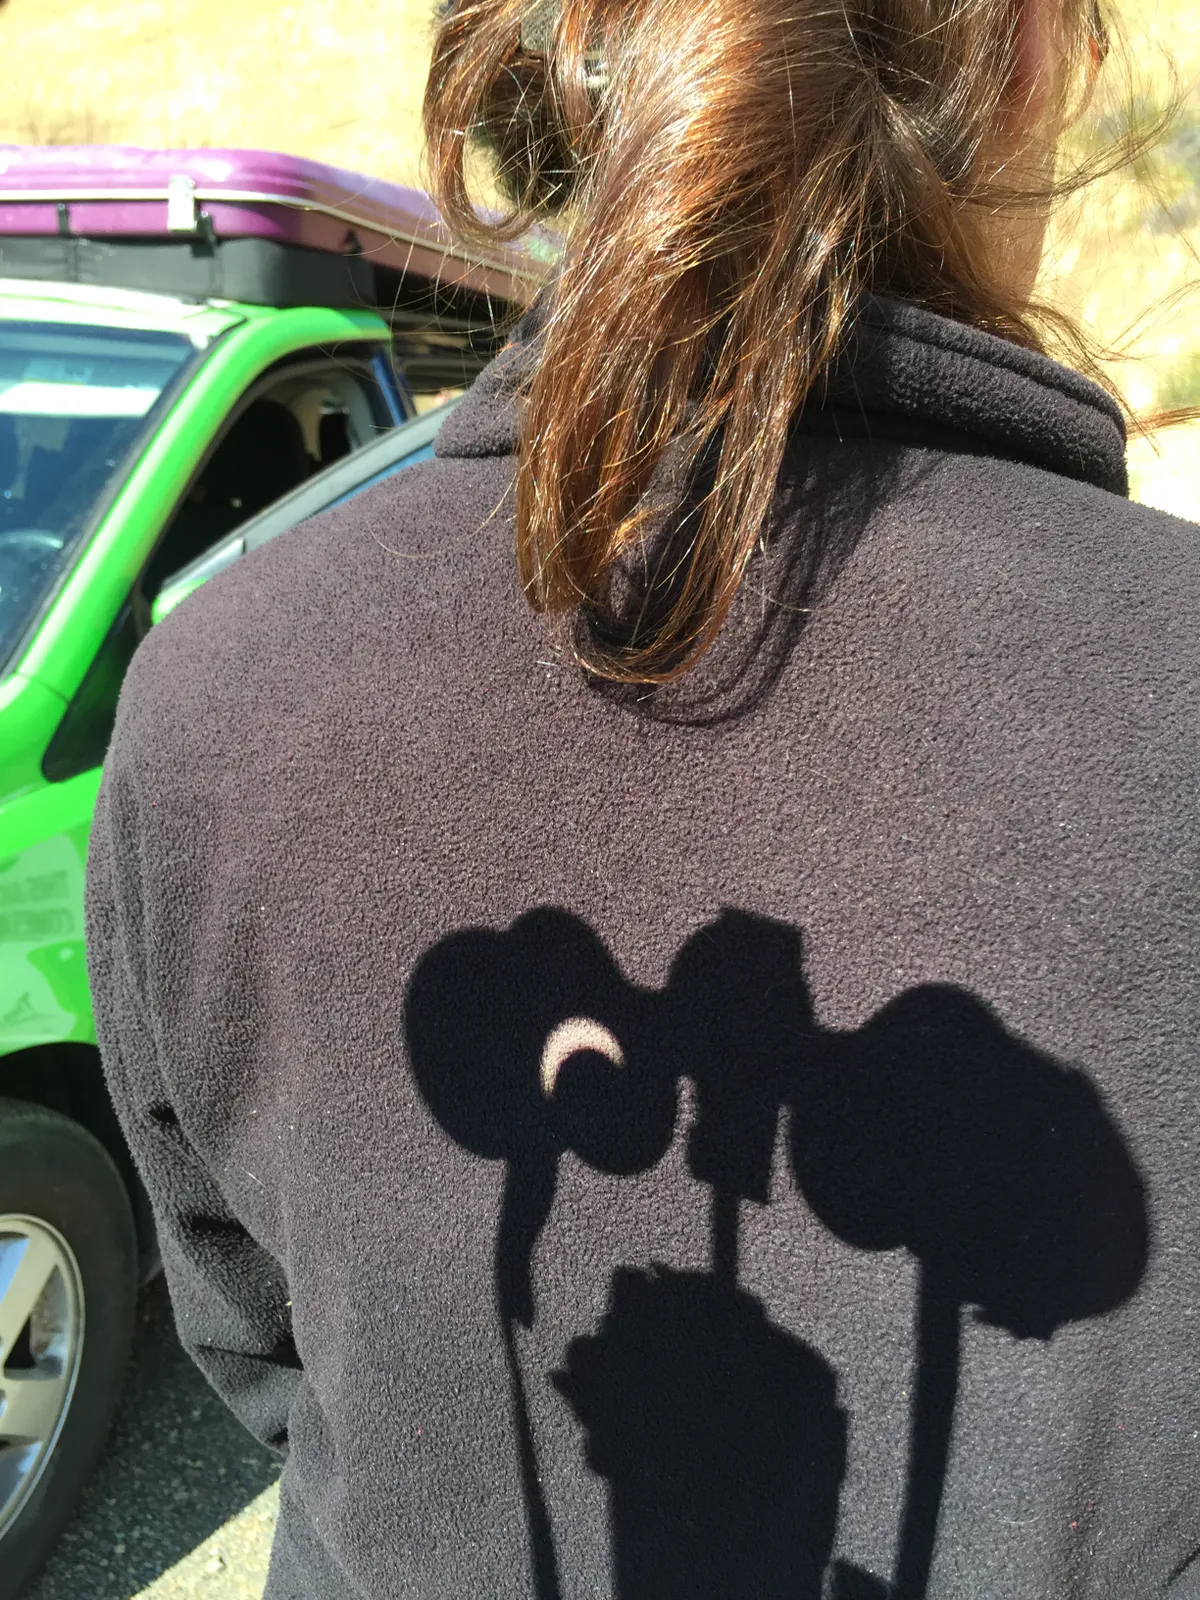 Talk about solar projection! A view of the eclipse projected through binoculars and onto a fellow eclipse chaser's back. Credit: Nick Spall.